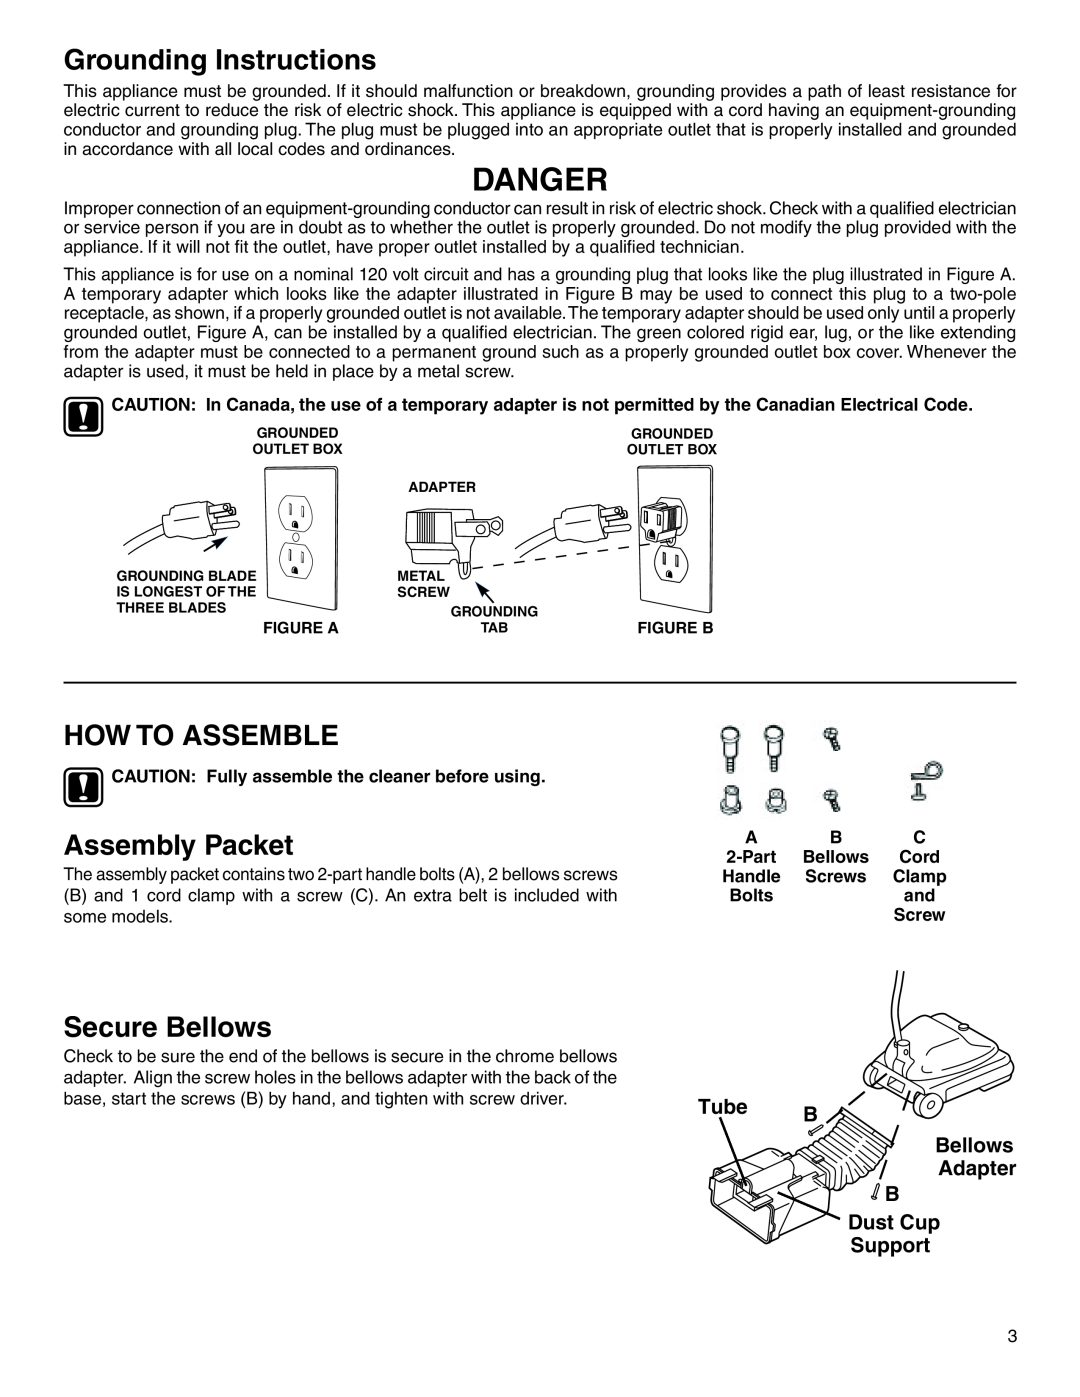 Sanitaire 880 Danger, Grounding Instructions, How To Assemble, Assembly Packet, Secure Bellows, Part Bellows Cord, Screws 